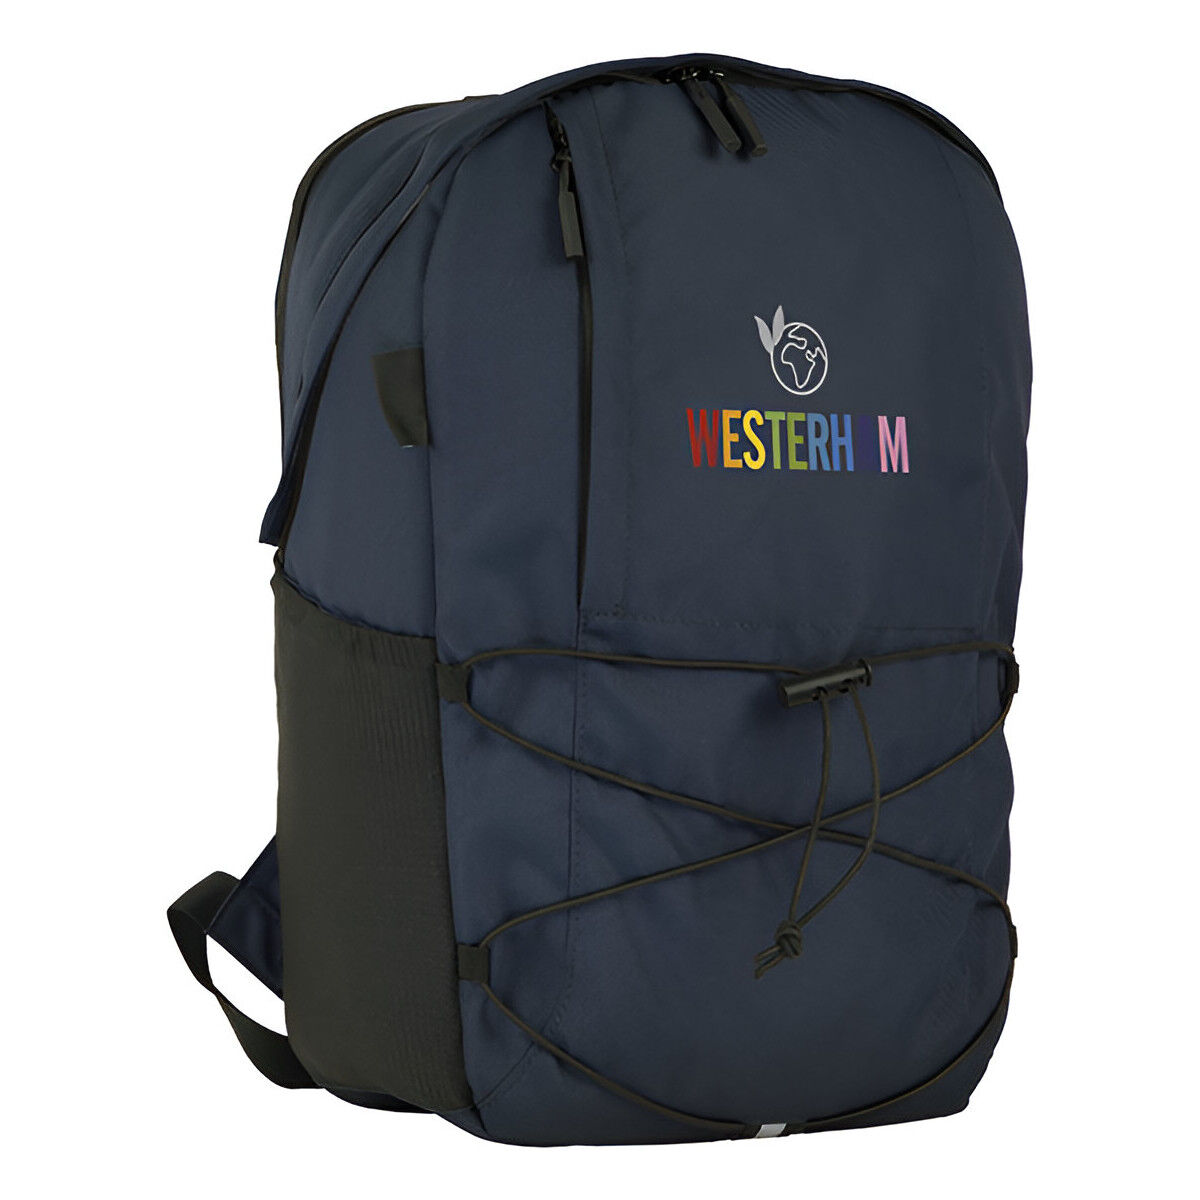 Westerham Recycled Laptop Backpack